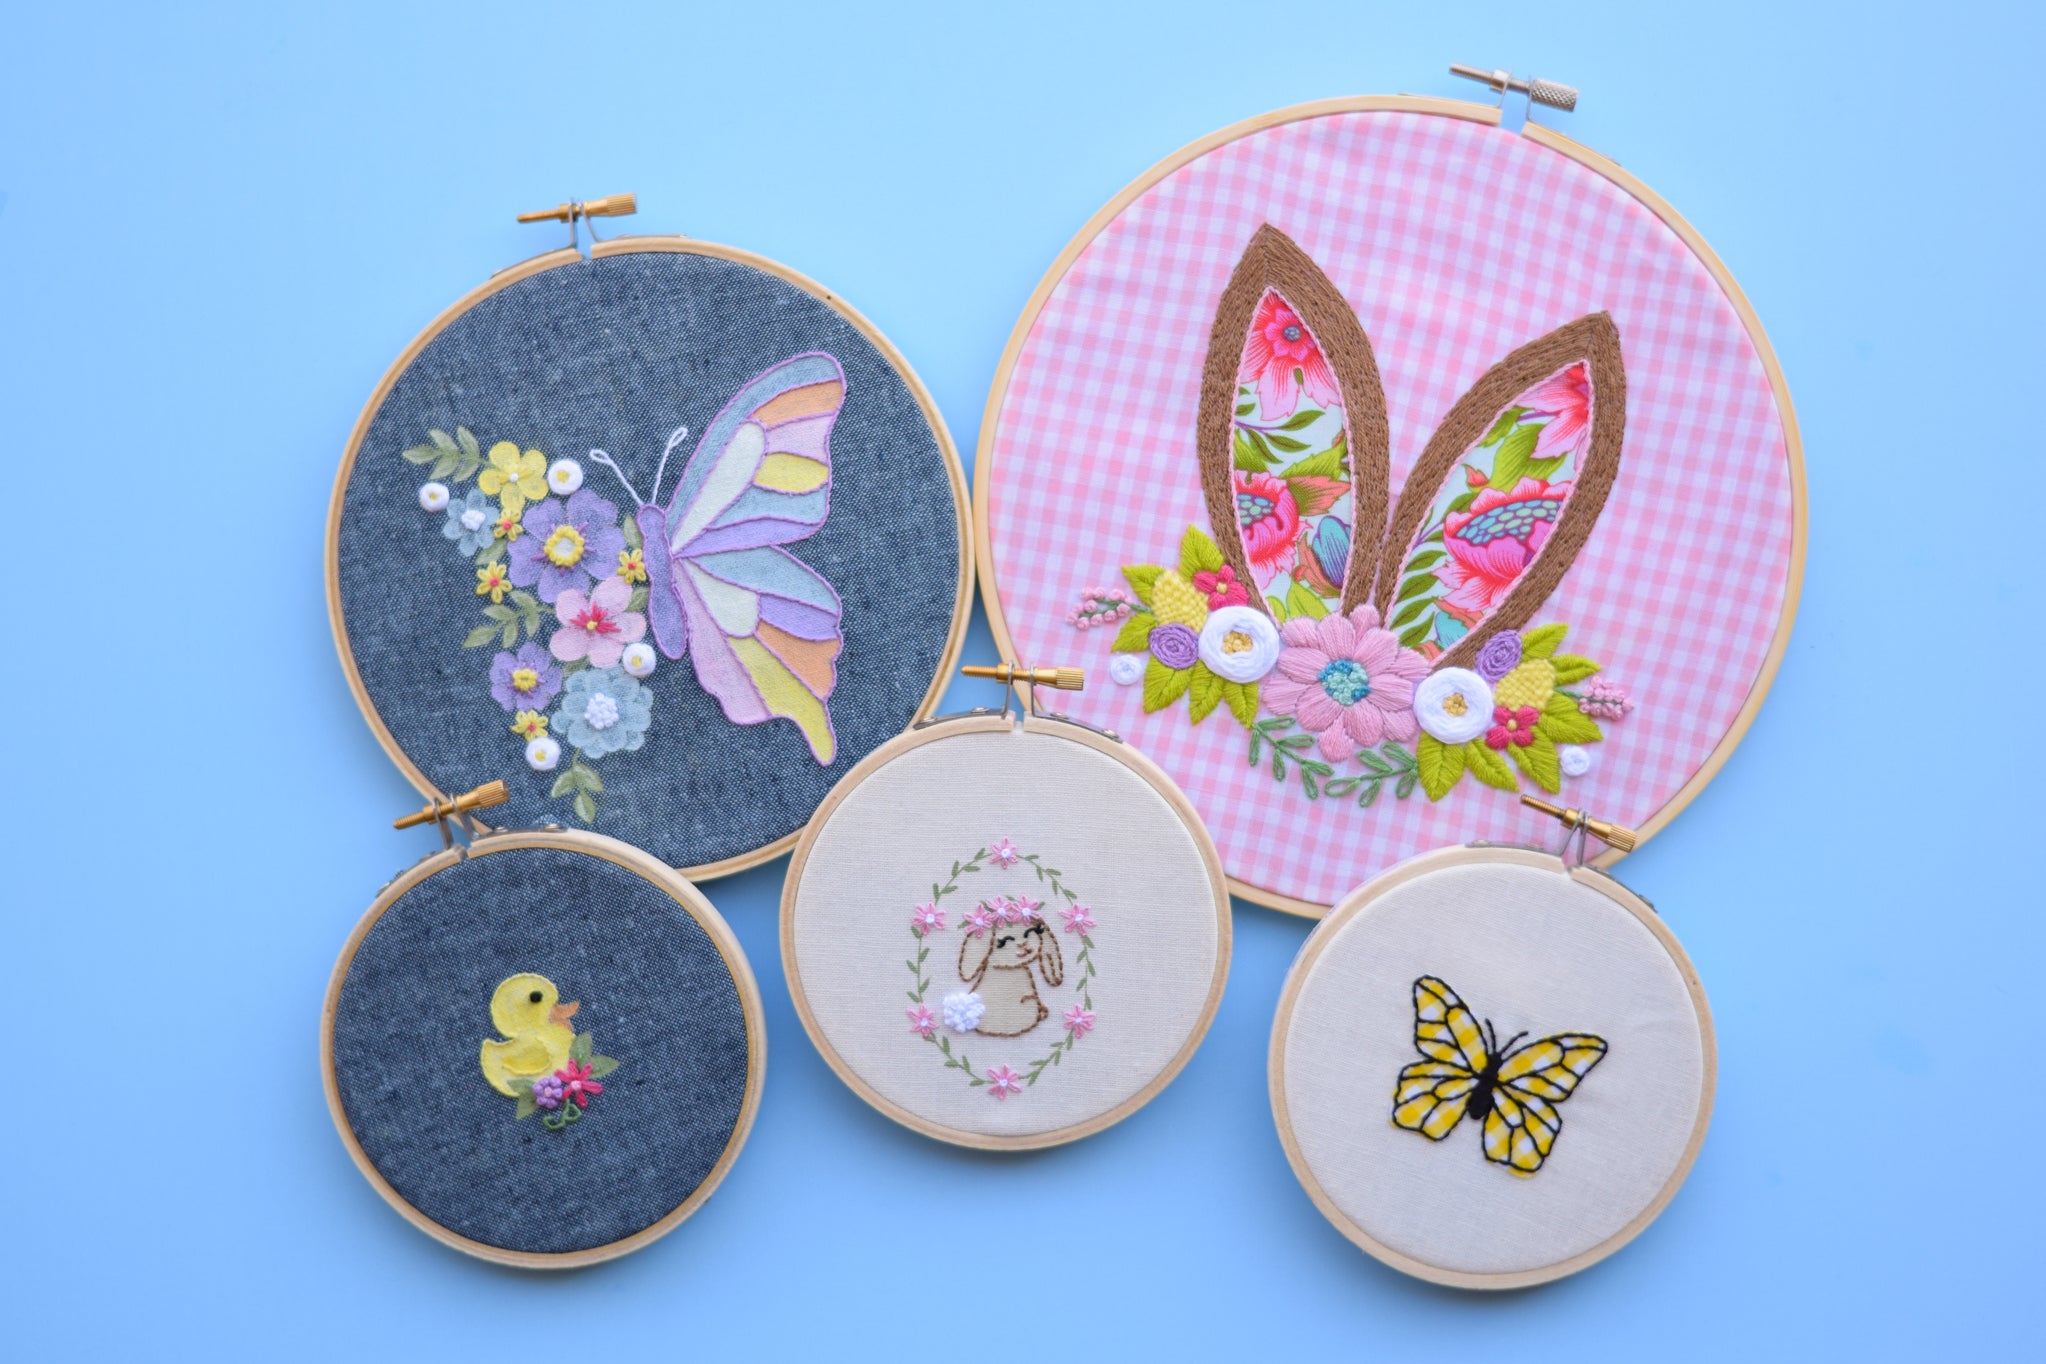 Using Fabric Paint and Appliqué with Hand Embroidery Patterns – Peony  Patterns